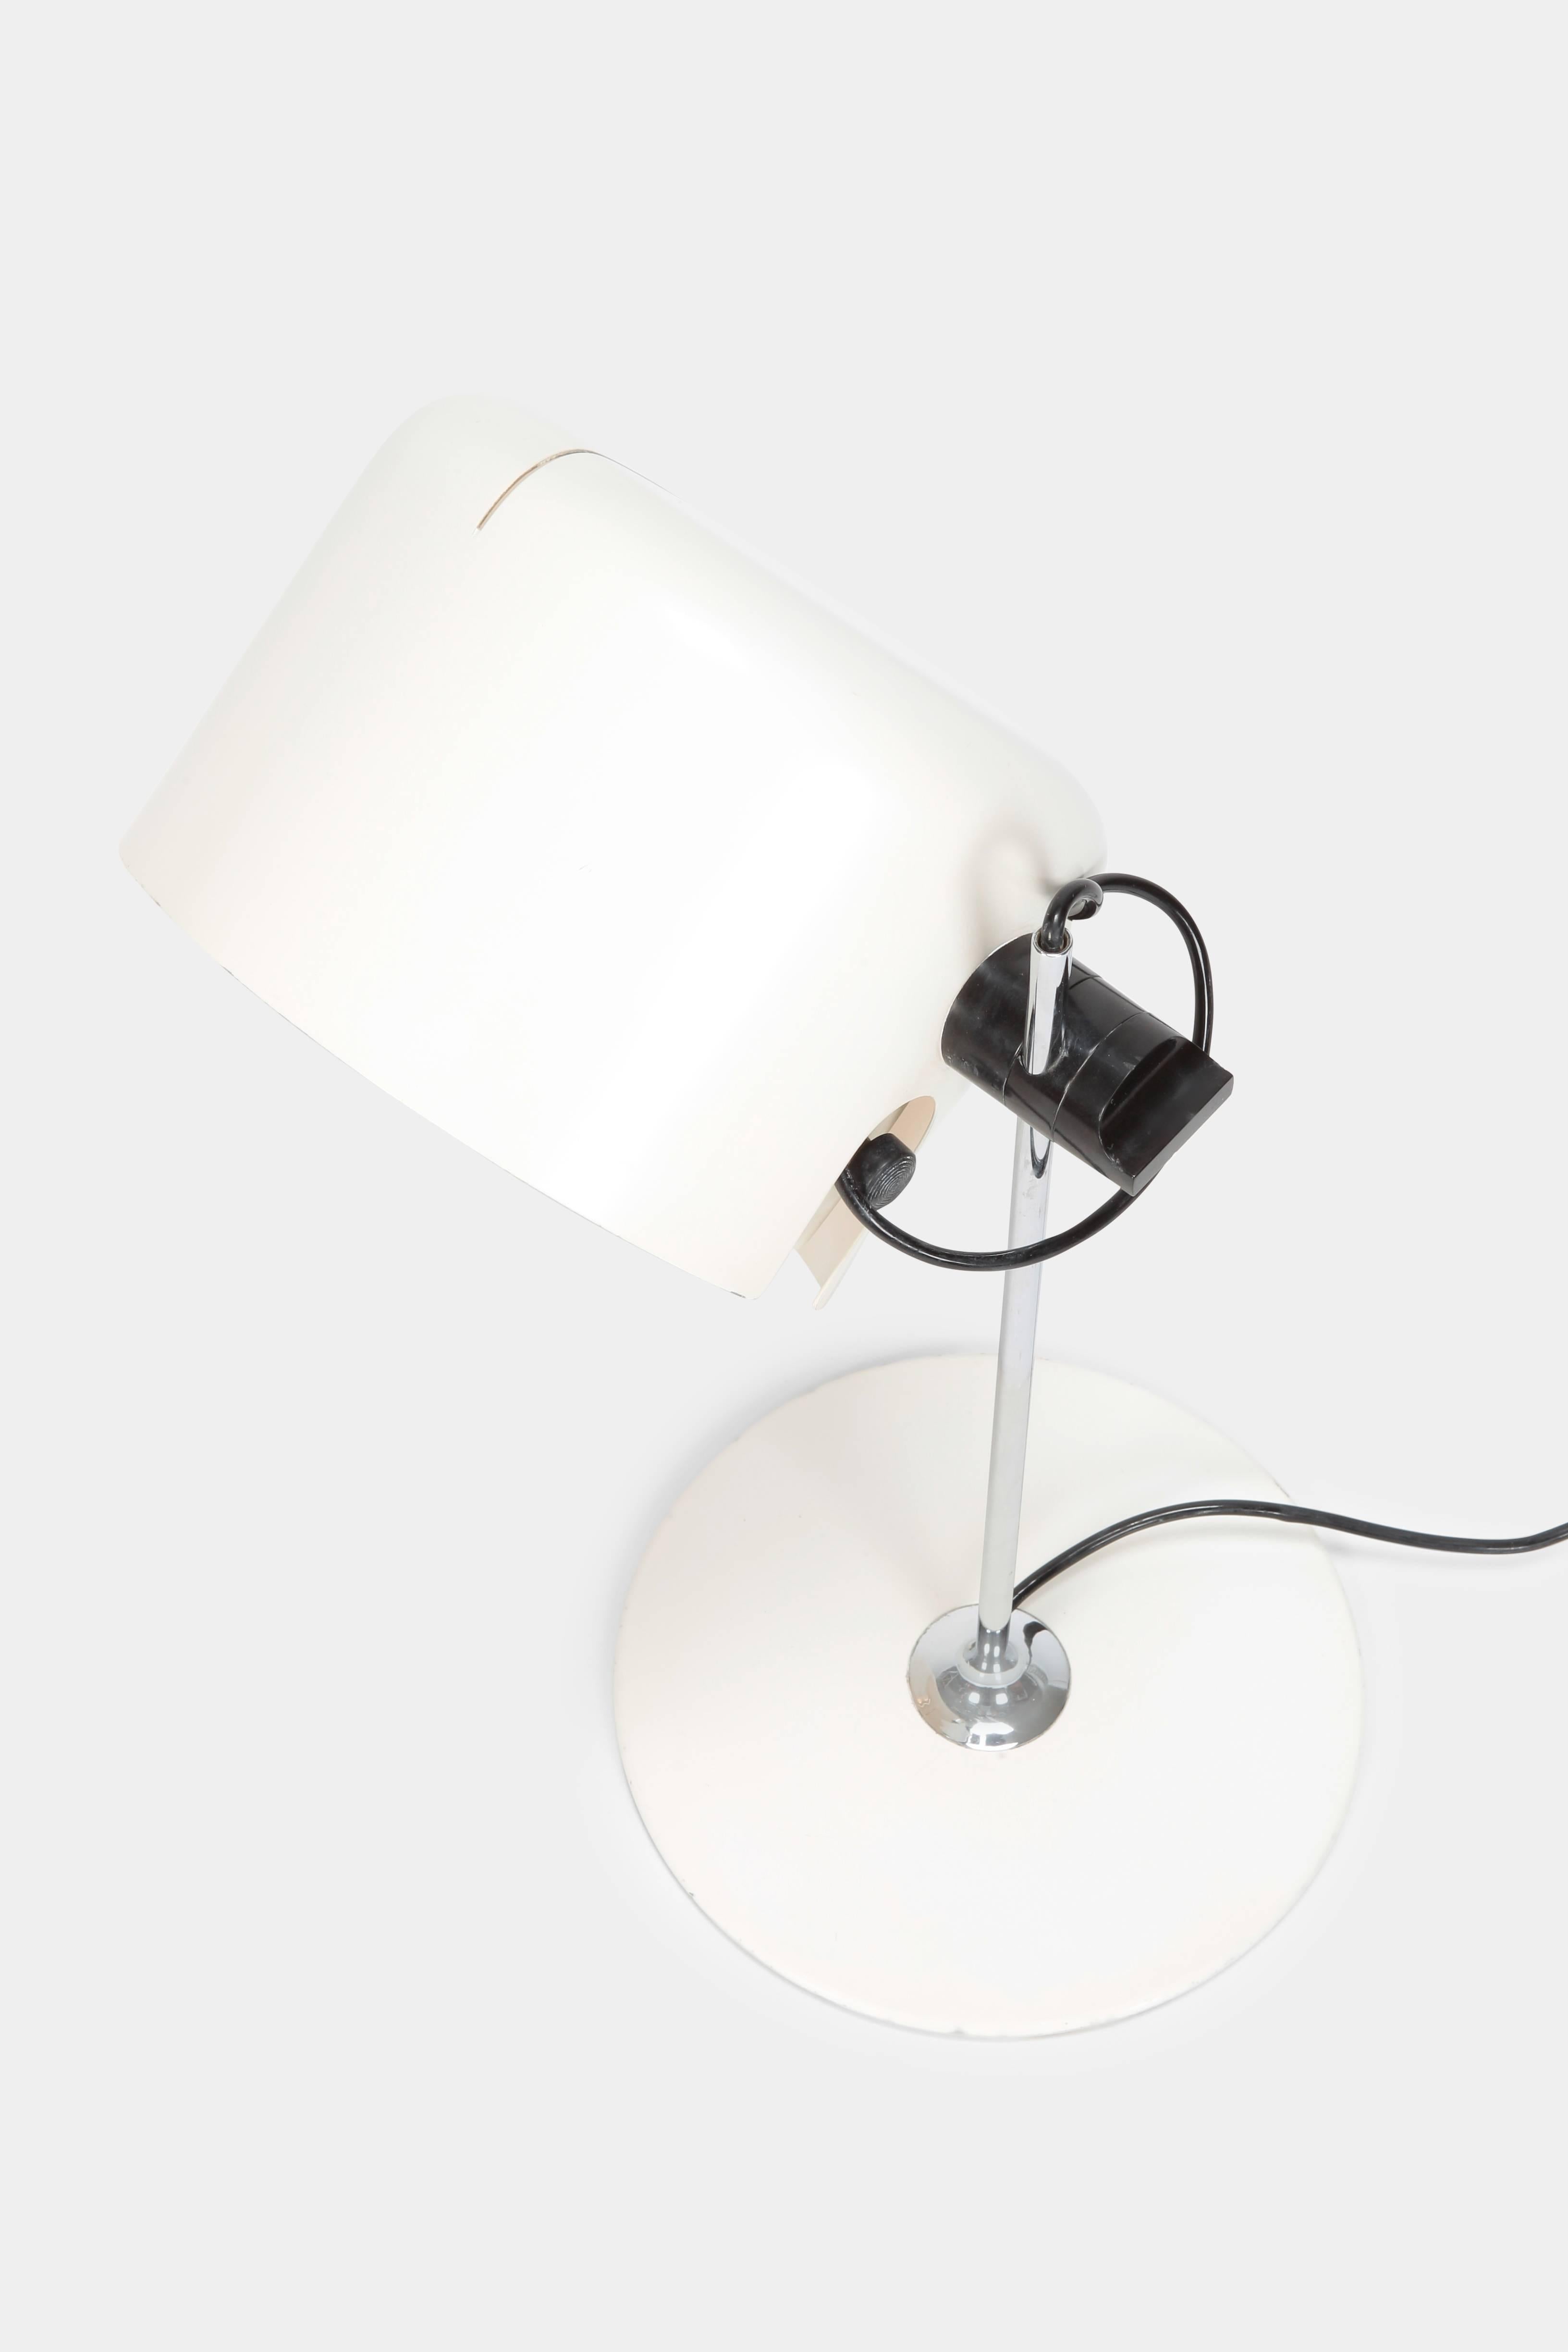 Joe Colombo “Coupe” table lamp manufactured by O-Luce in the 1960s in Italy. Adjustable white lacquered aluminium shade attached to a chrome steel pole on a white lacquered metal base. The back of the shade features a thin slit which creates a